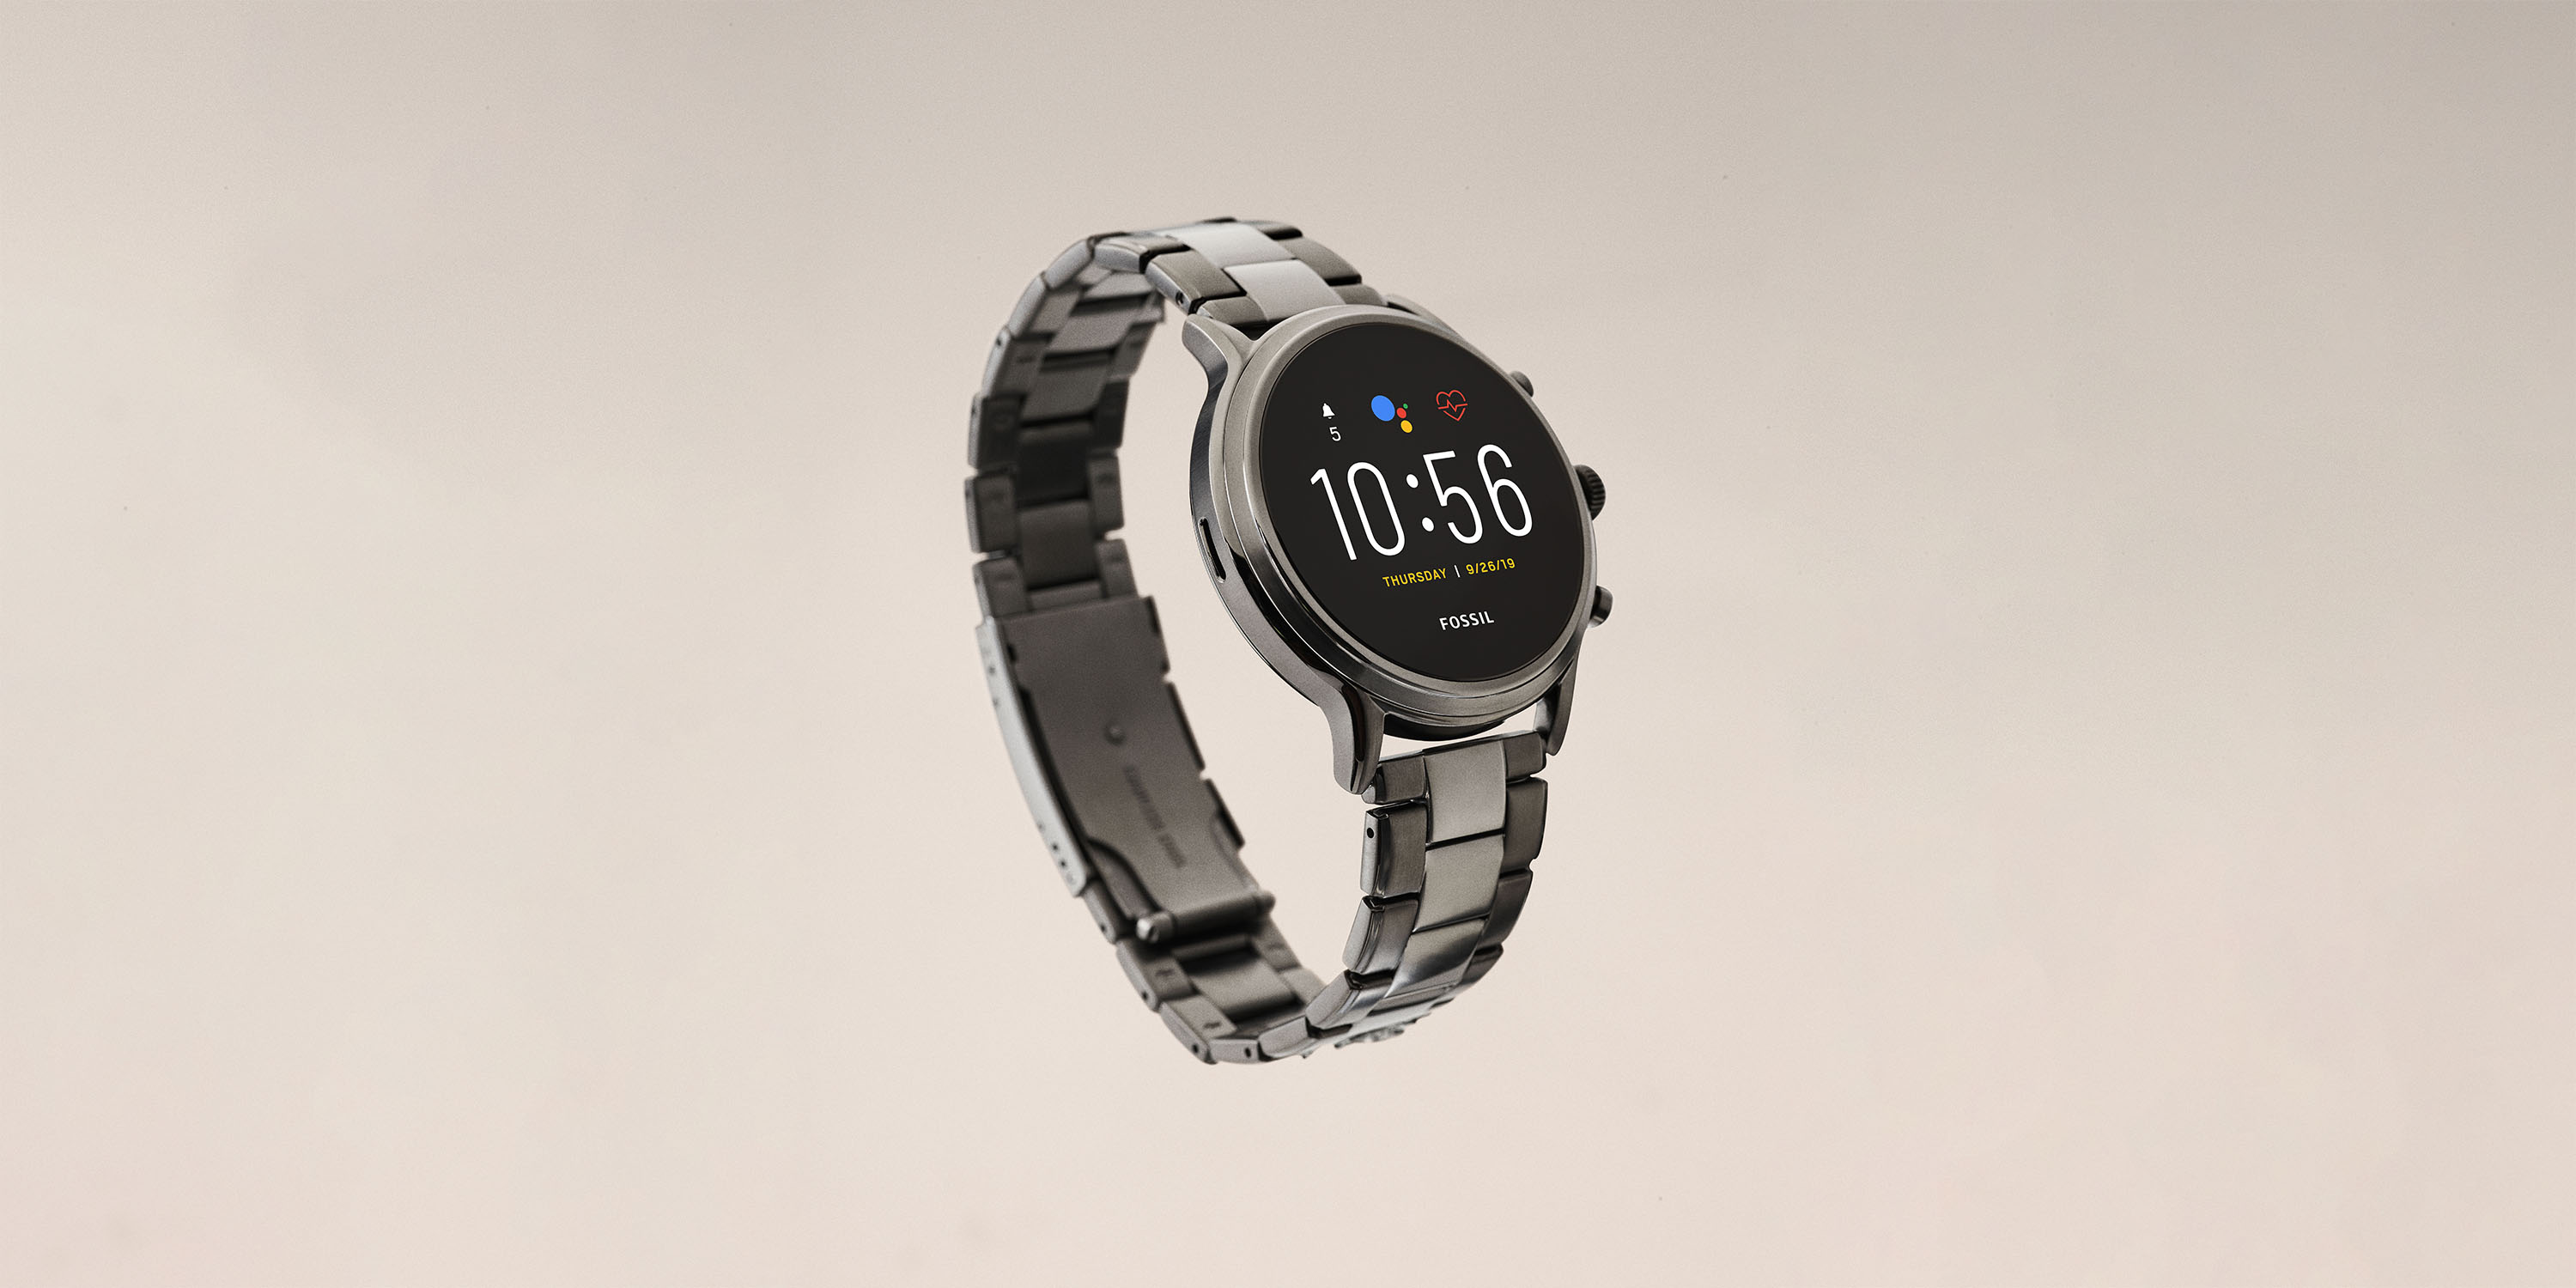 fossil snapdragon 3100 watches